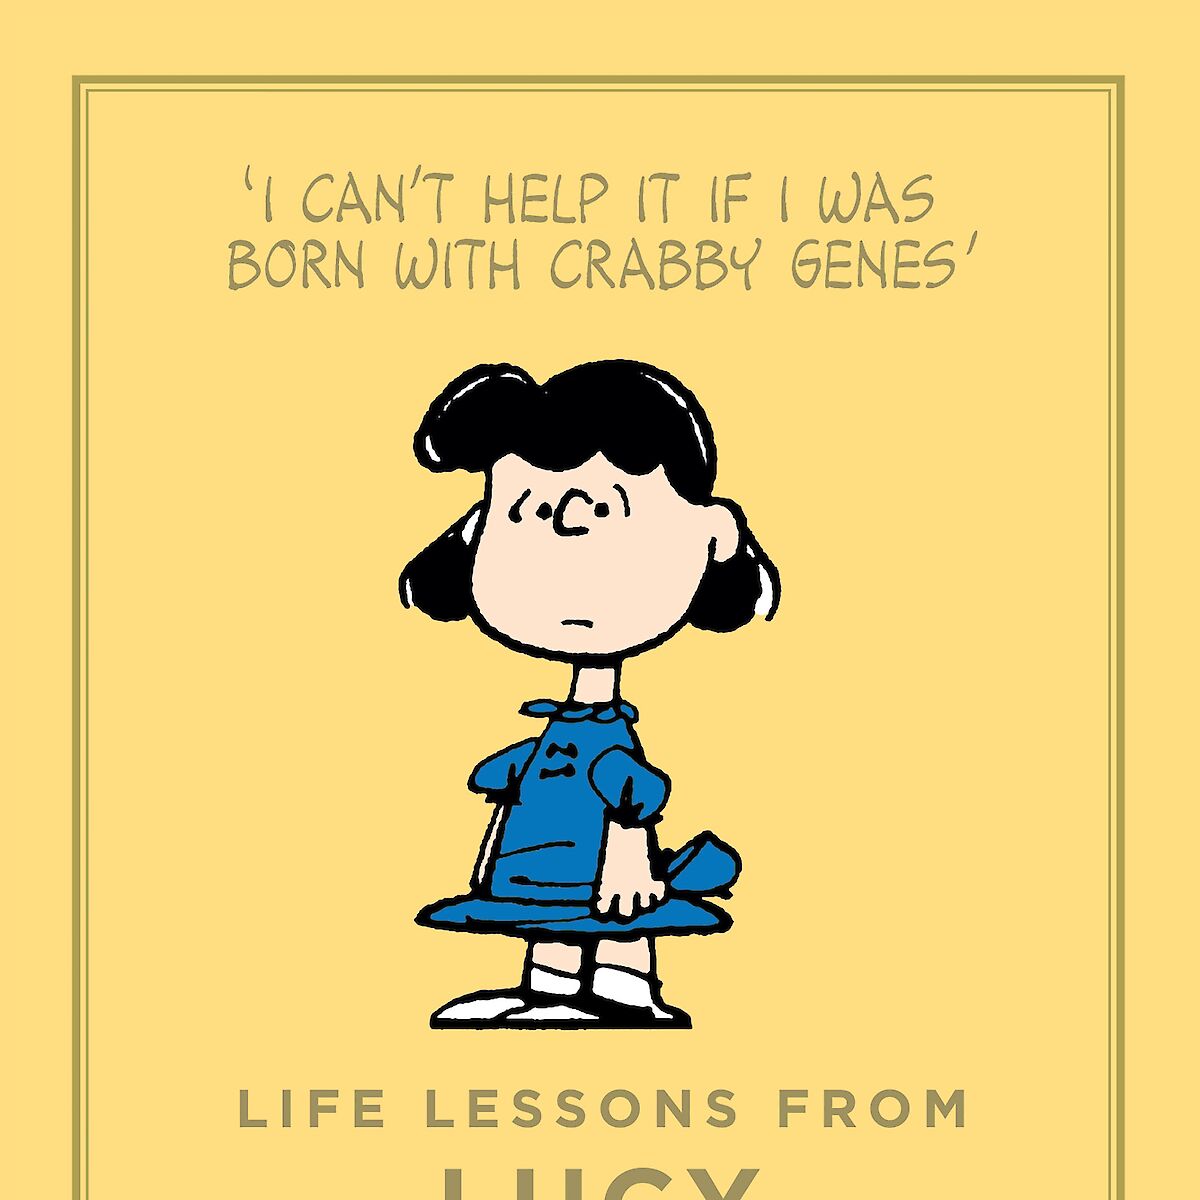 Life Lessons from Lucy by Charles M. Schulz – Canongate Books